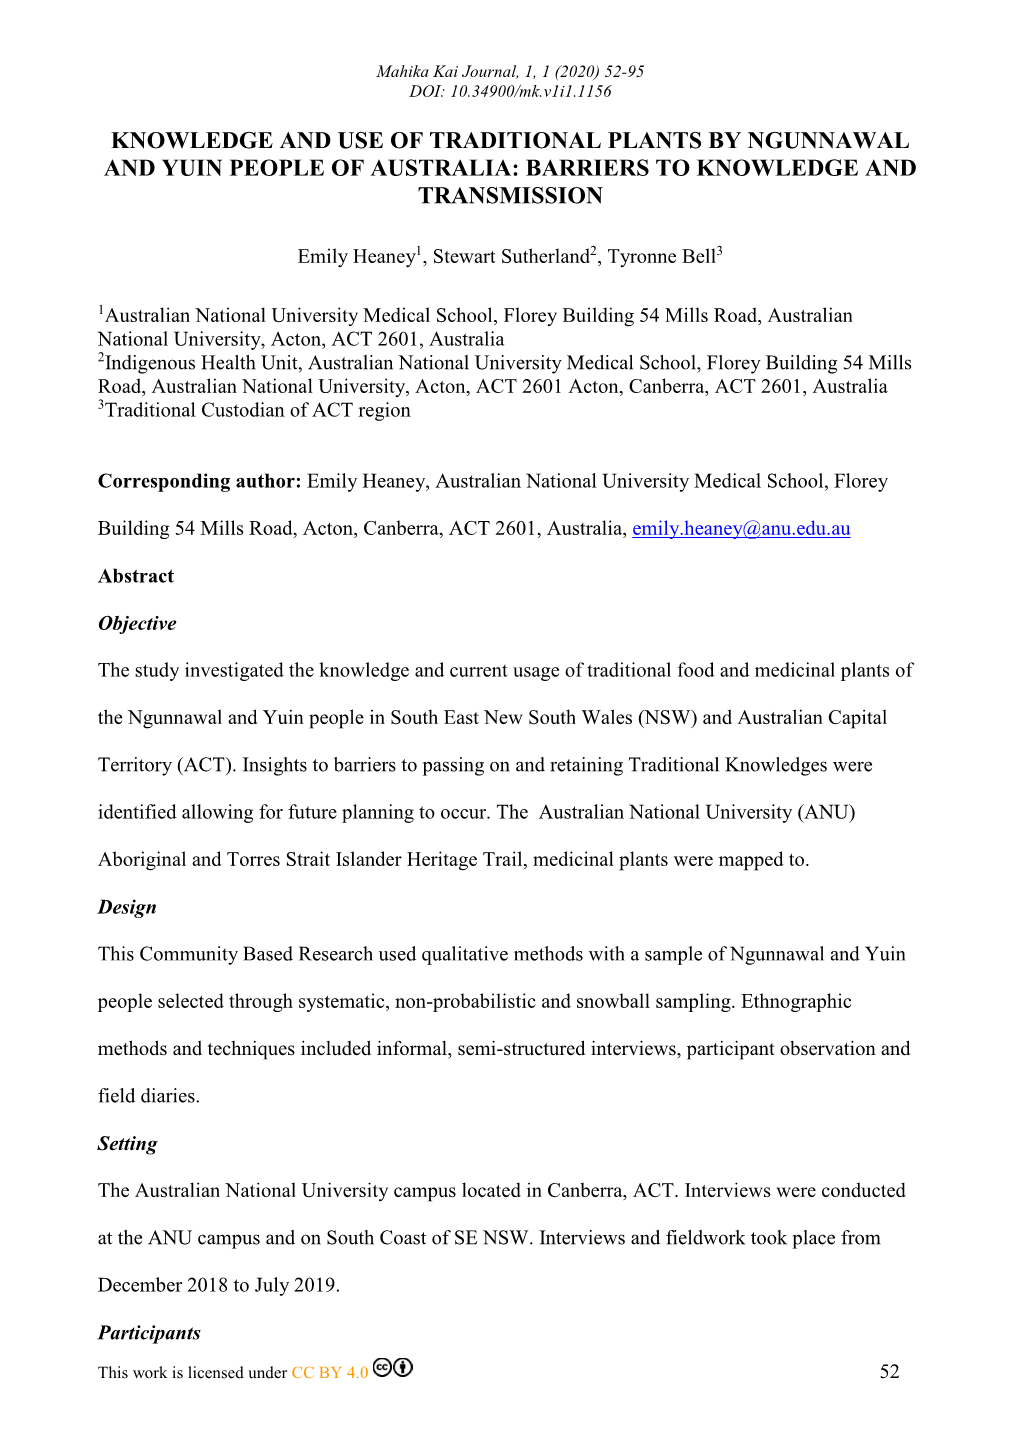 Knowledge and Use of Traditional Plants by Ngunnawal and Yuin People of Australia: Barriers to Knowledge and Transmission